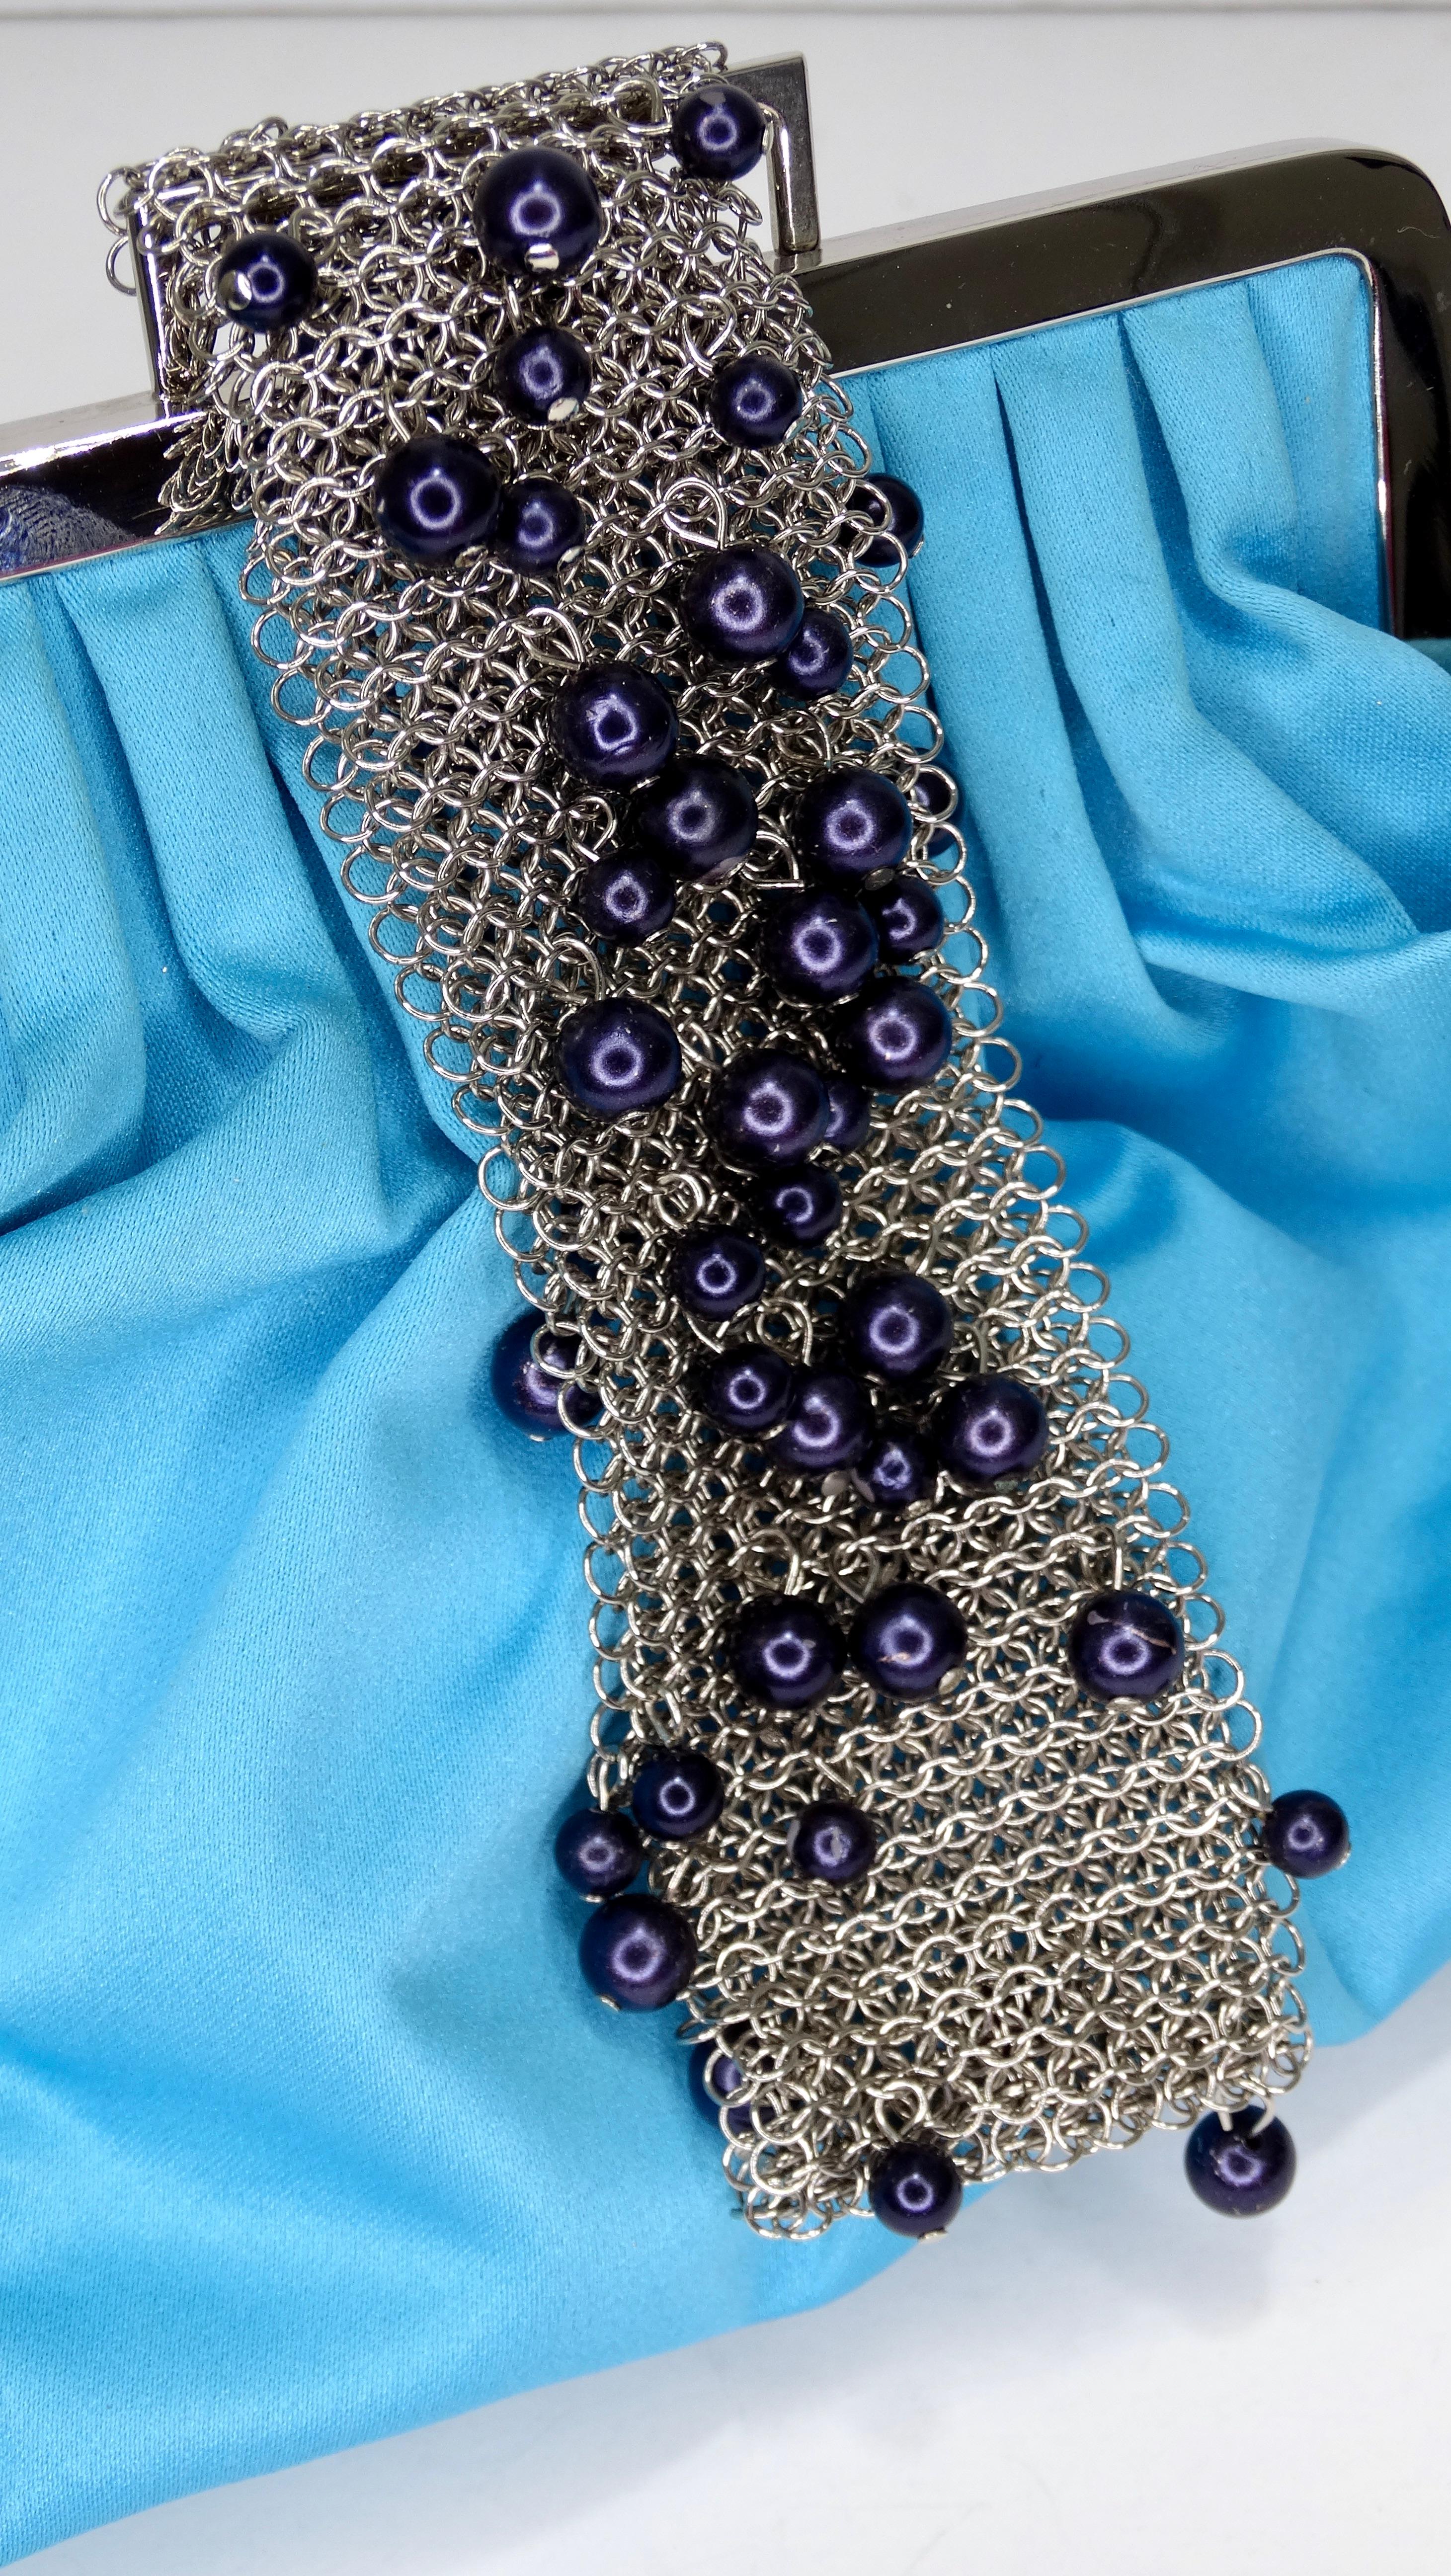 Gianni Versace 1990s Blue Chainmail Clutch 1